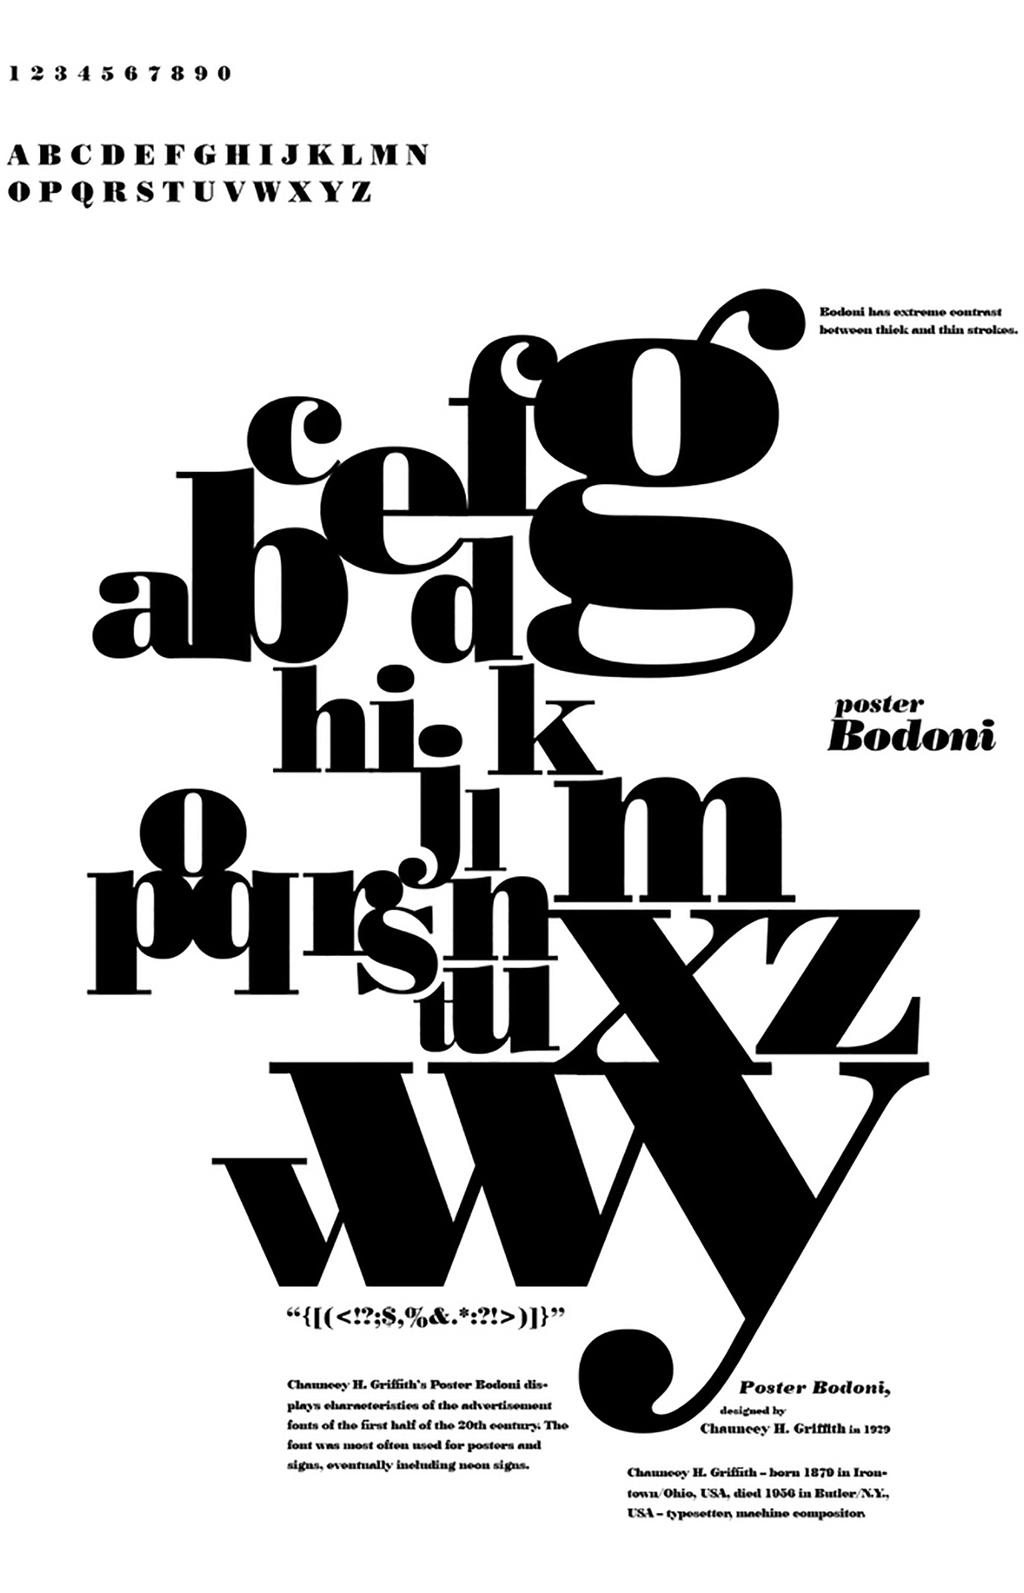 Bodoni created letters that exhibit abrupt, unmodulated contrast between thick and thin elements, and razor-thin